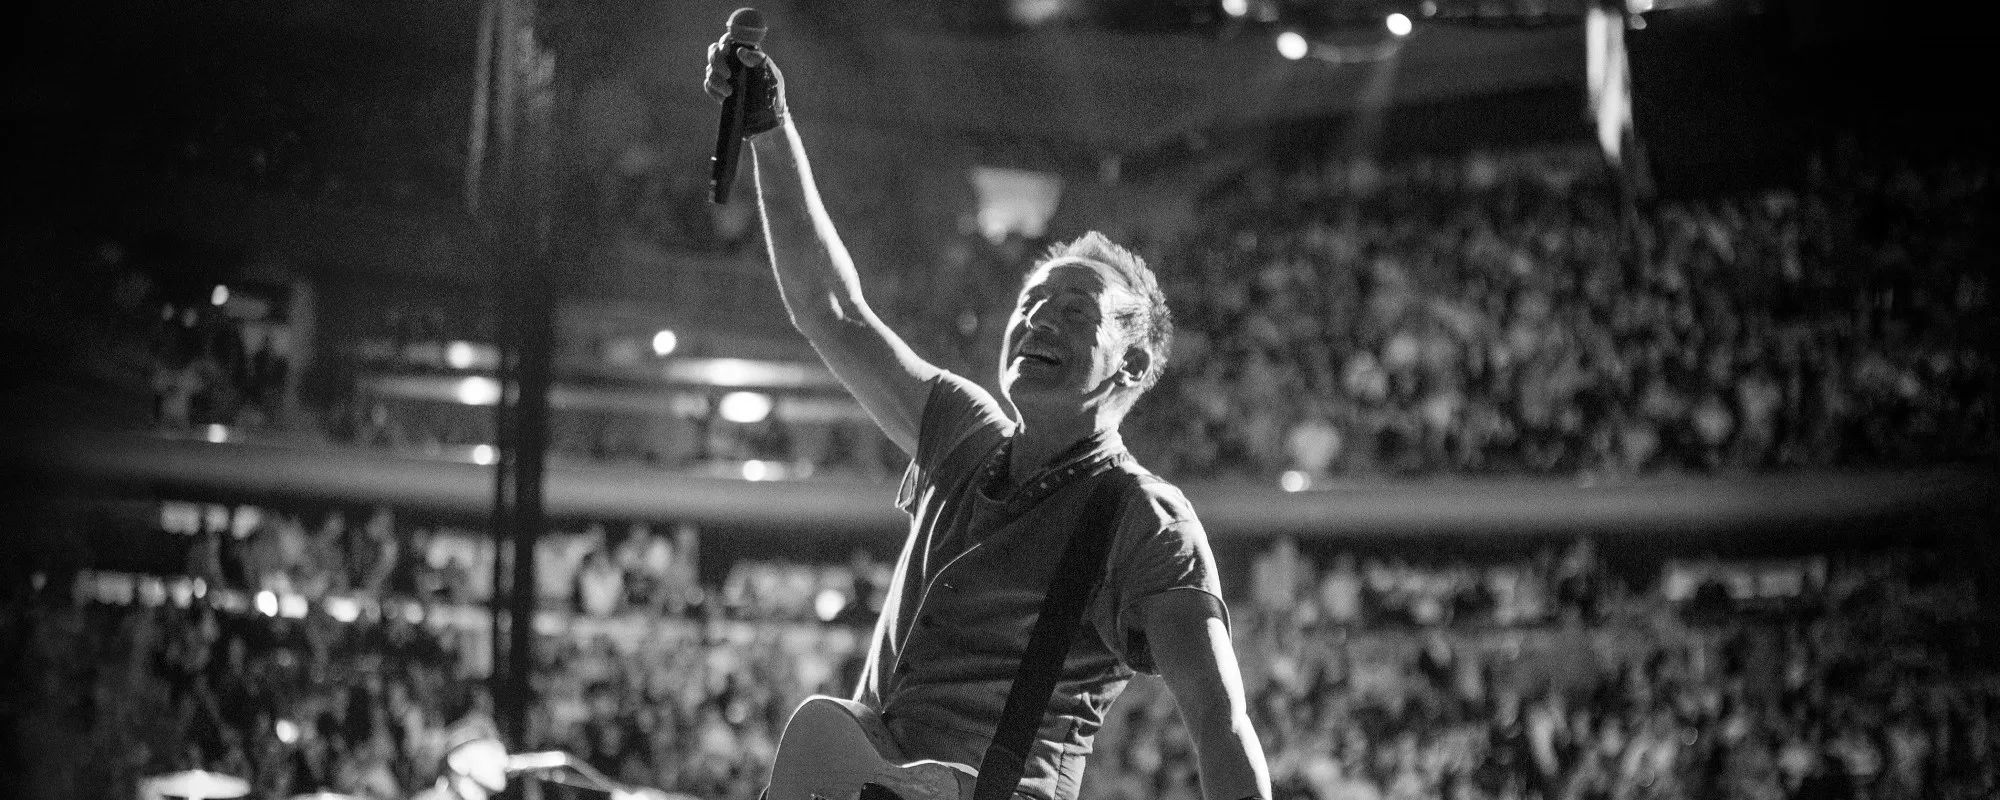 Bruce Springsteen Returns From Health Break, Tells Fans “We Are Going to Rock You Into the Ground” on Tour